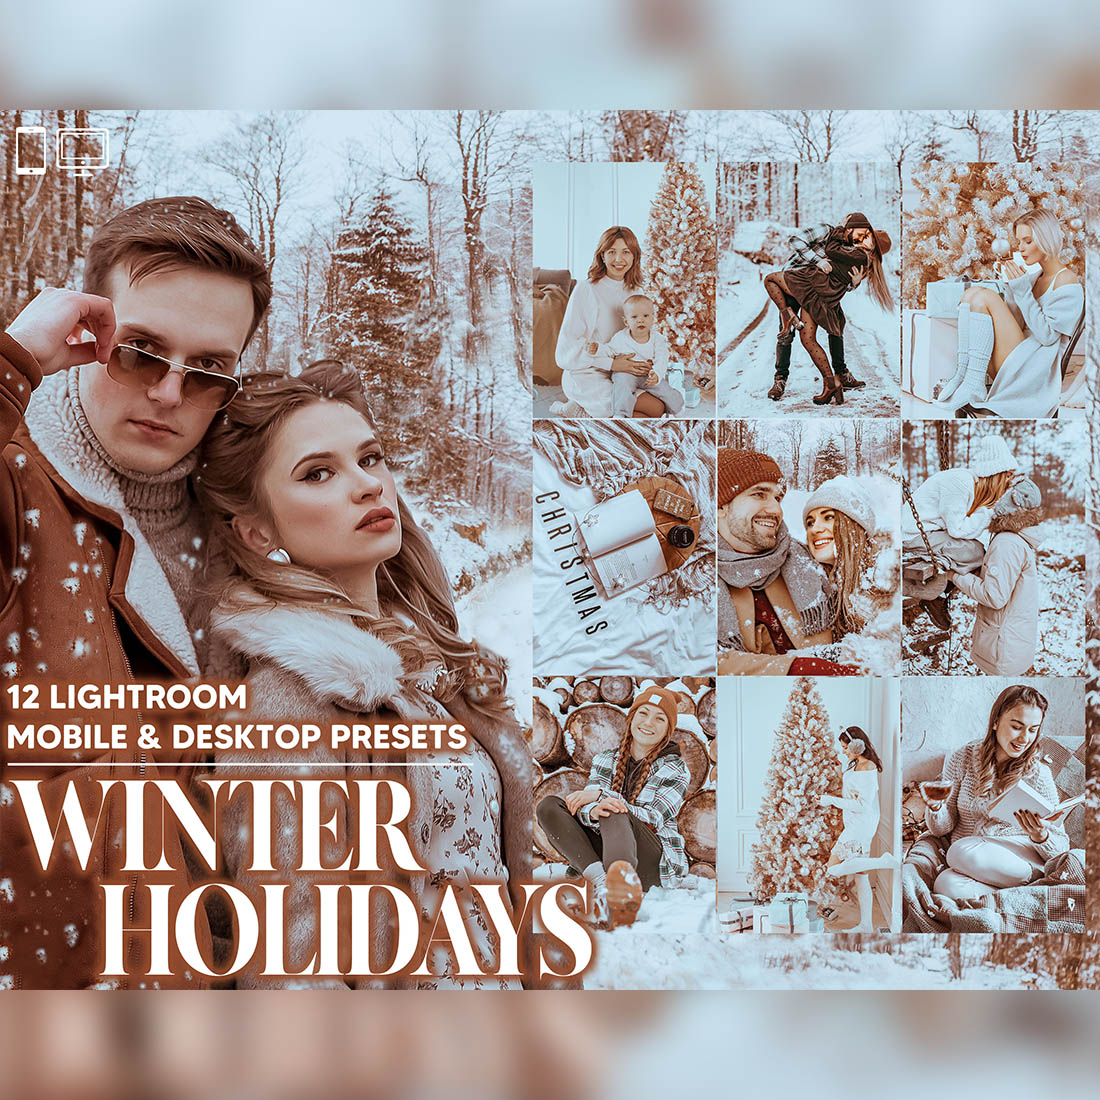 12 Winter Holidays Lightroom Presets, Xmas Mobile Preset, Cocoa Desktop, Blogger And Lifestyle Theme For Instagram LR Filter DNG Portrait cover image.